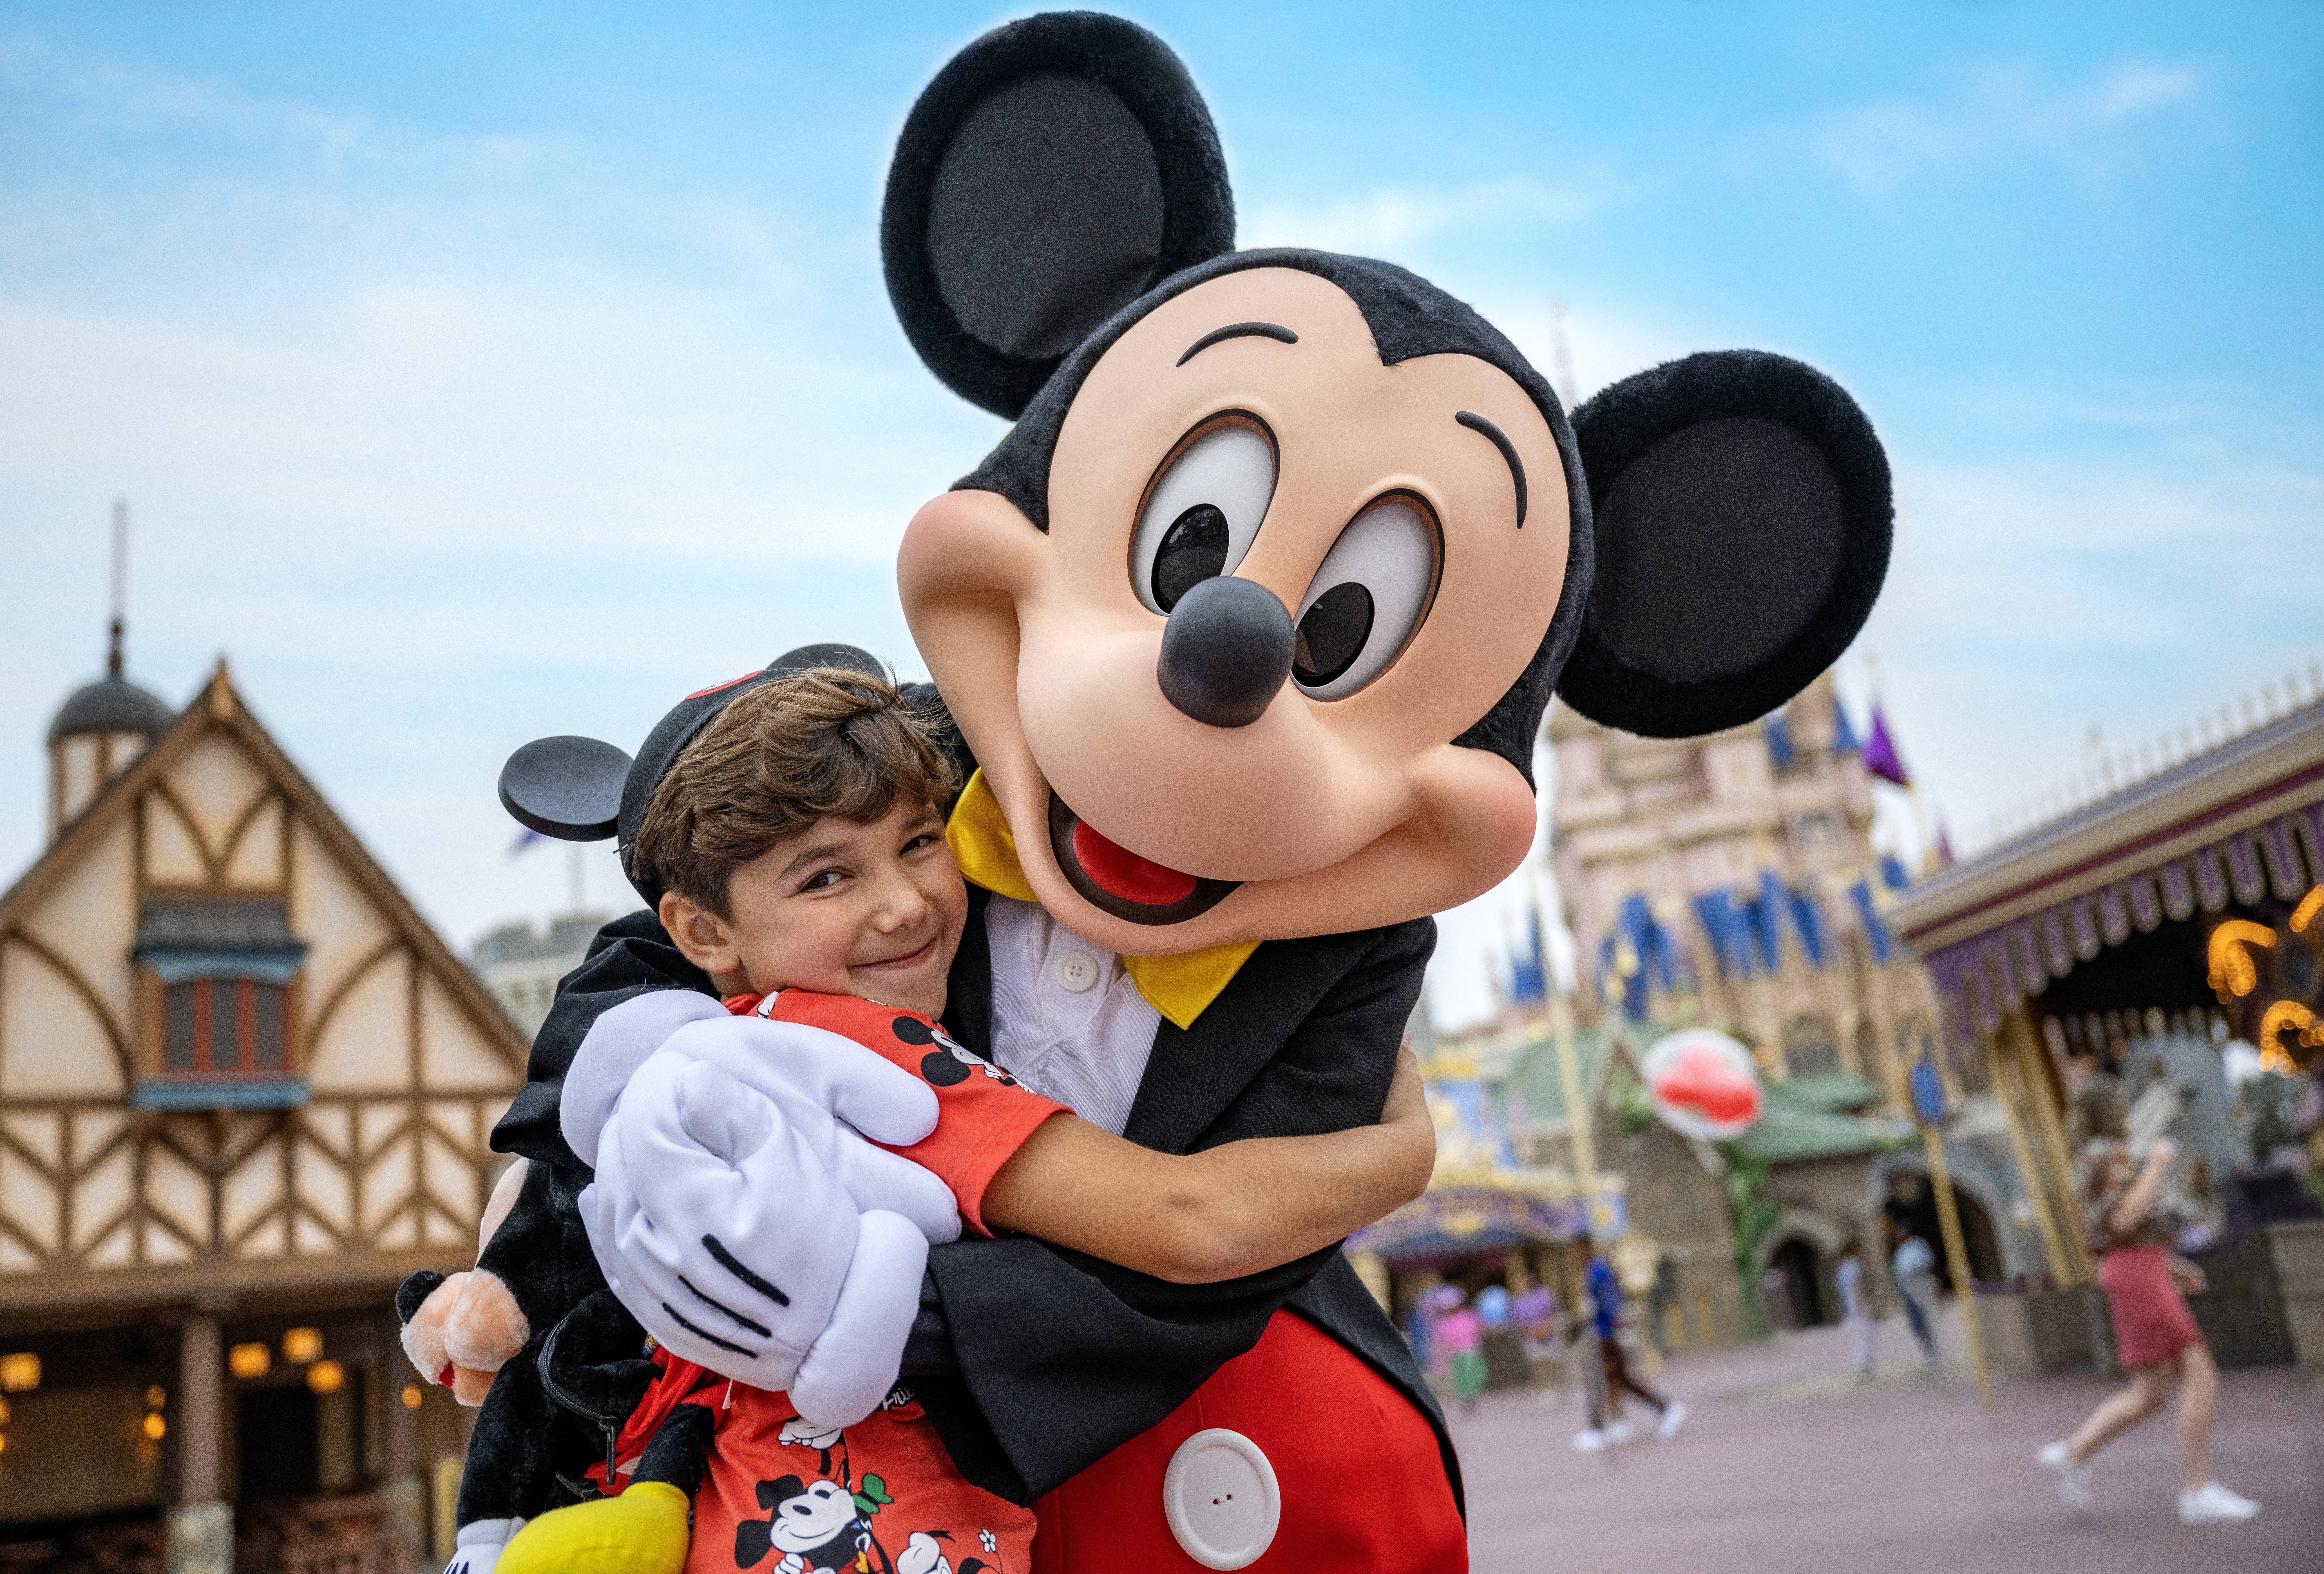 Mickey Mouse Hugging a Small Boy Wearing Mickey Ears